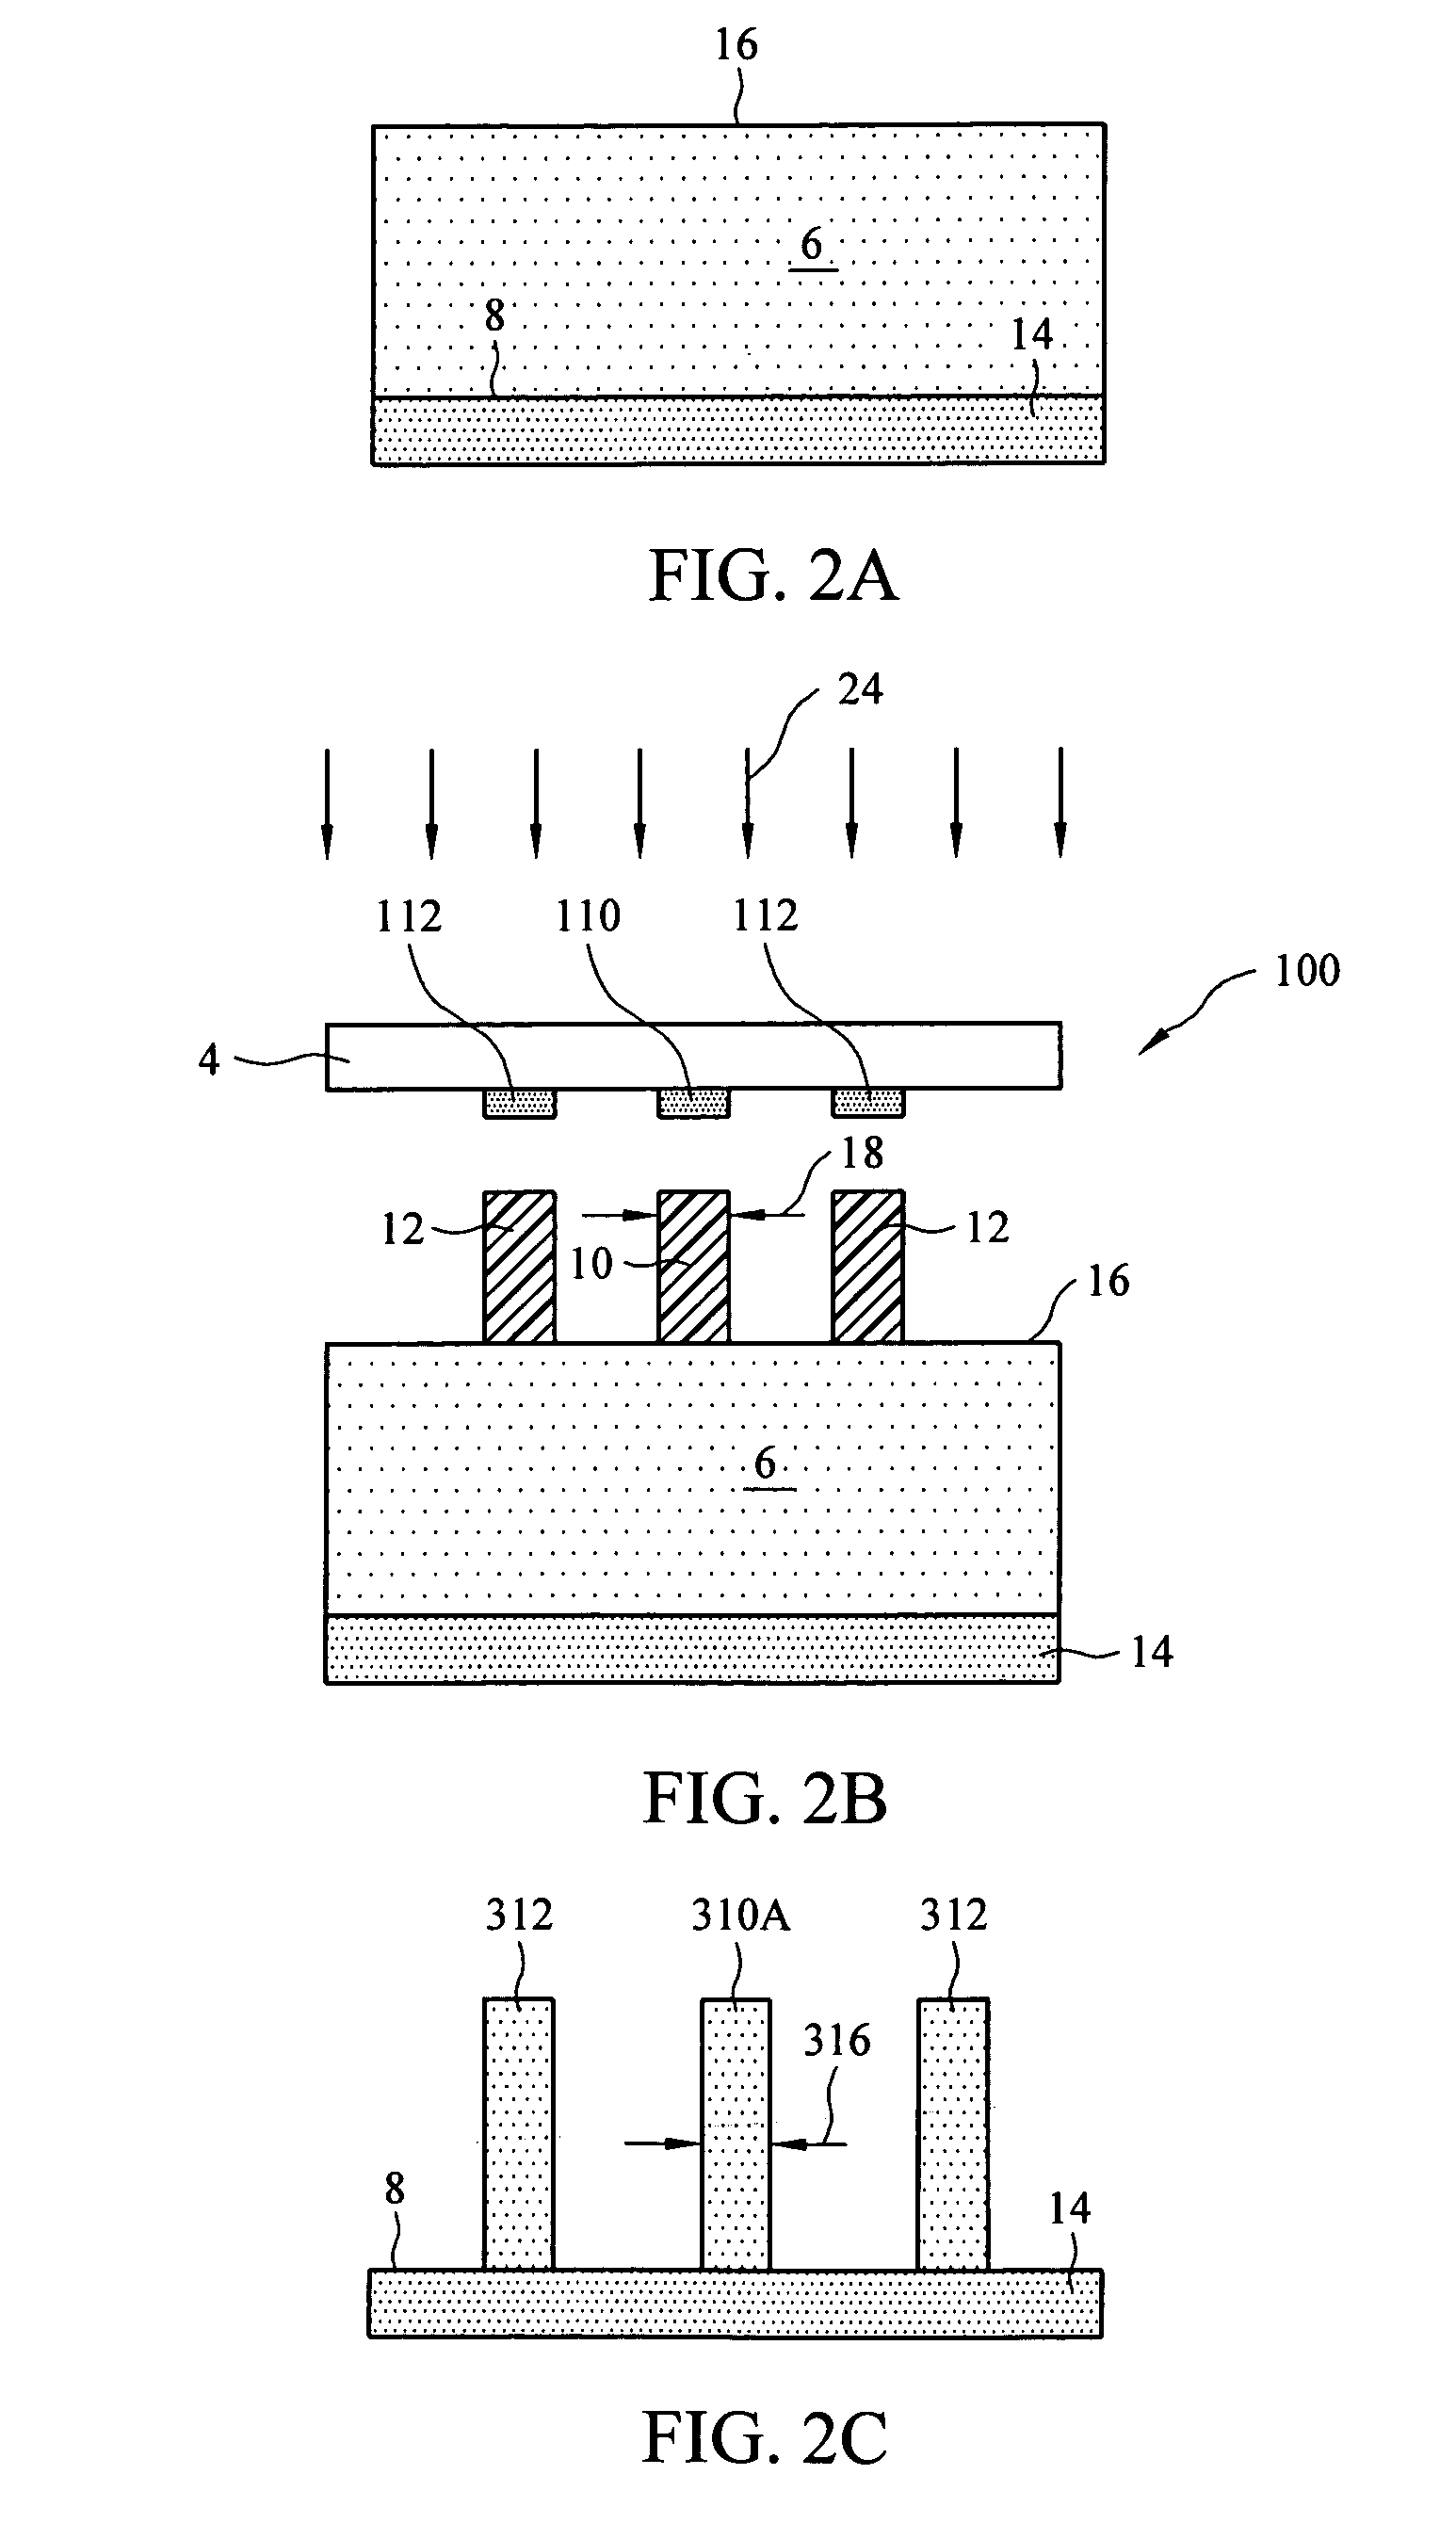 Utilizing compensation features in photolithography for semiconductor device fabrication